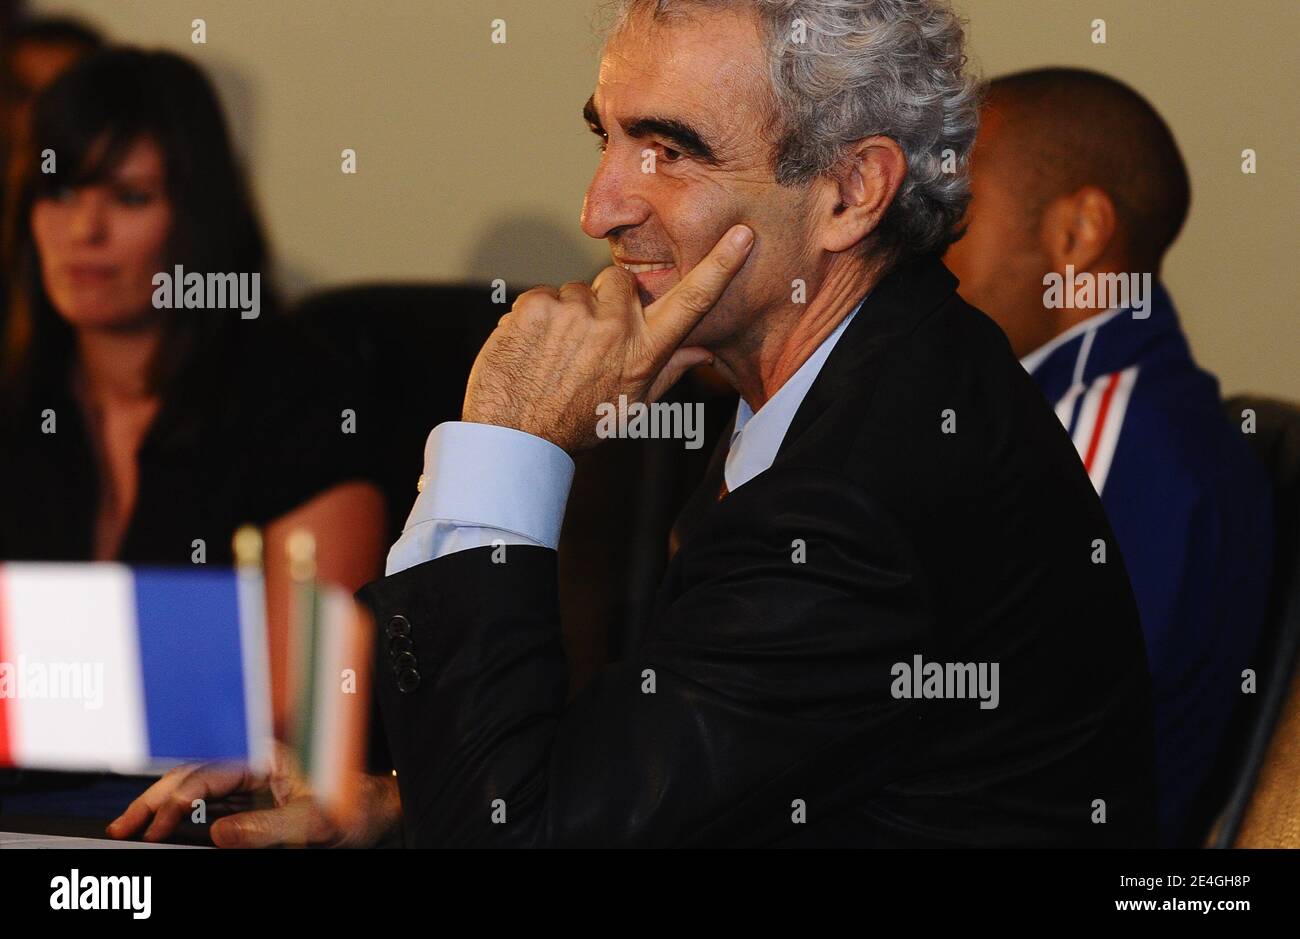 France's coach Raymond Domenech and France's captain Thierry Henry during a press conference before the World Cup 2010 Qualifying soccer match, Ireland vs France at Croke Park stadium in Dublin, Ireland on November 14, 2009. Photo by Steeve McMay/ABACAPRESS.COM Stock Photo